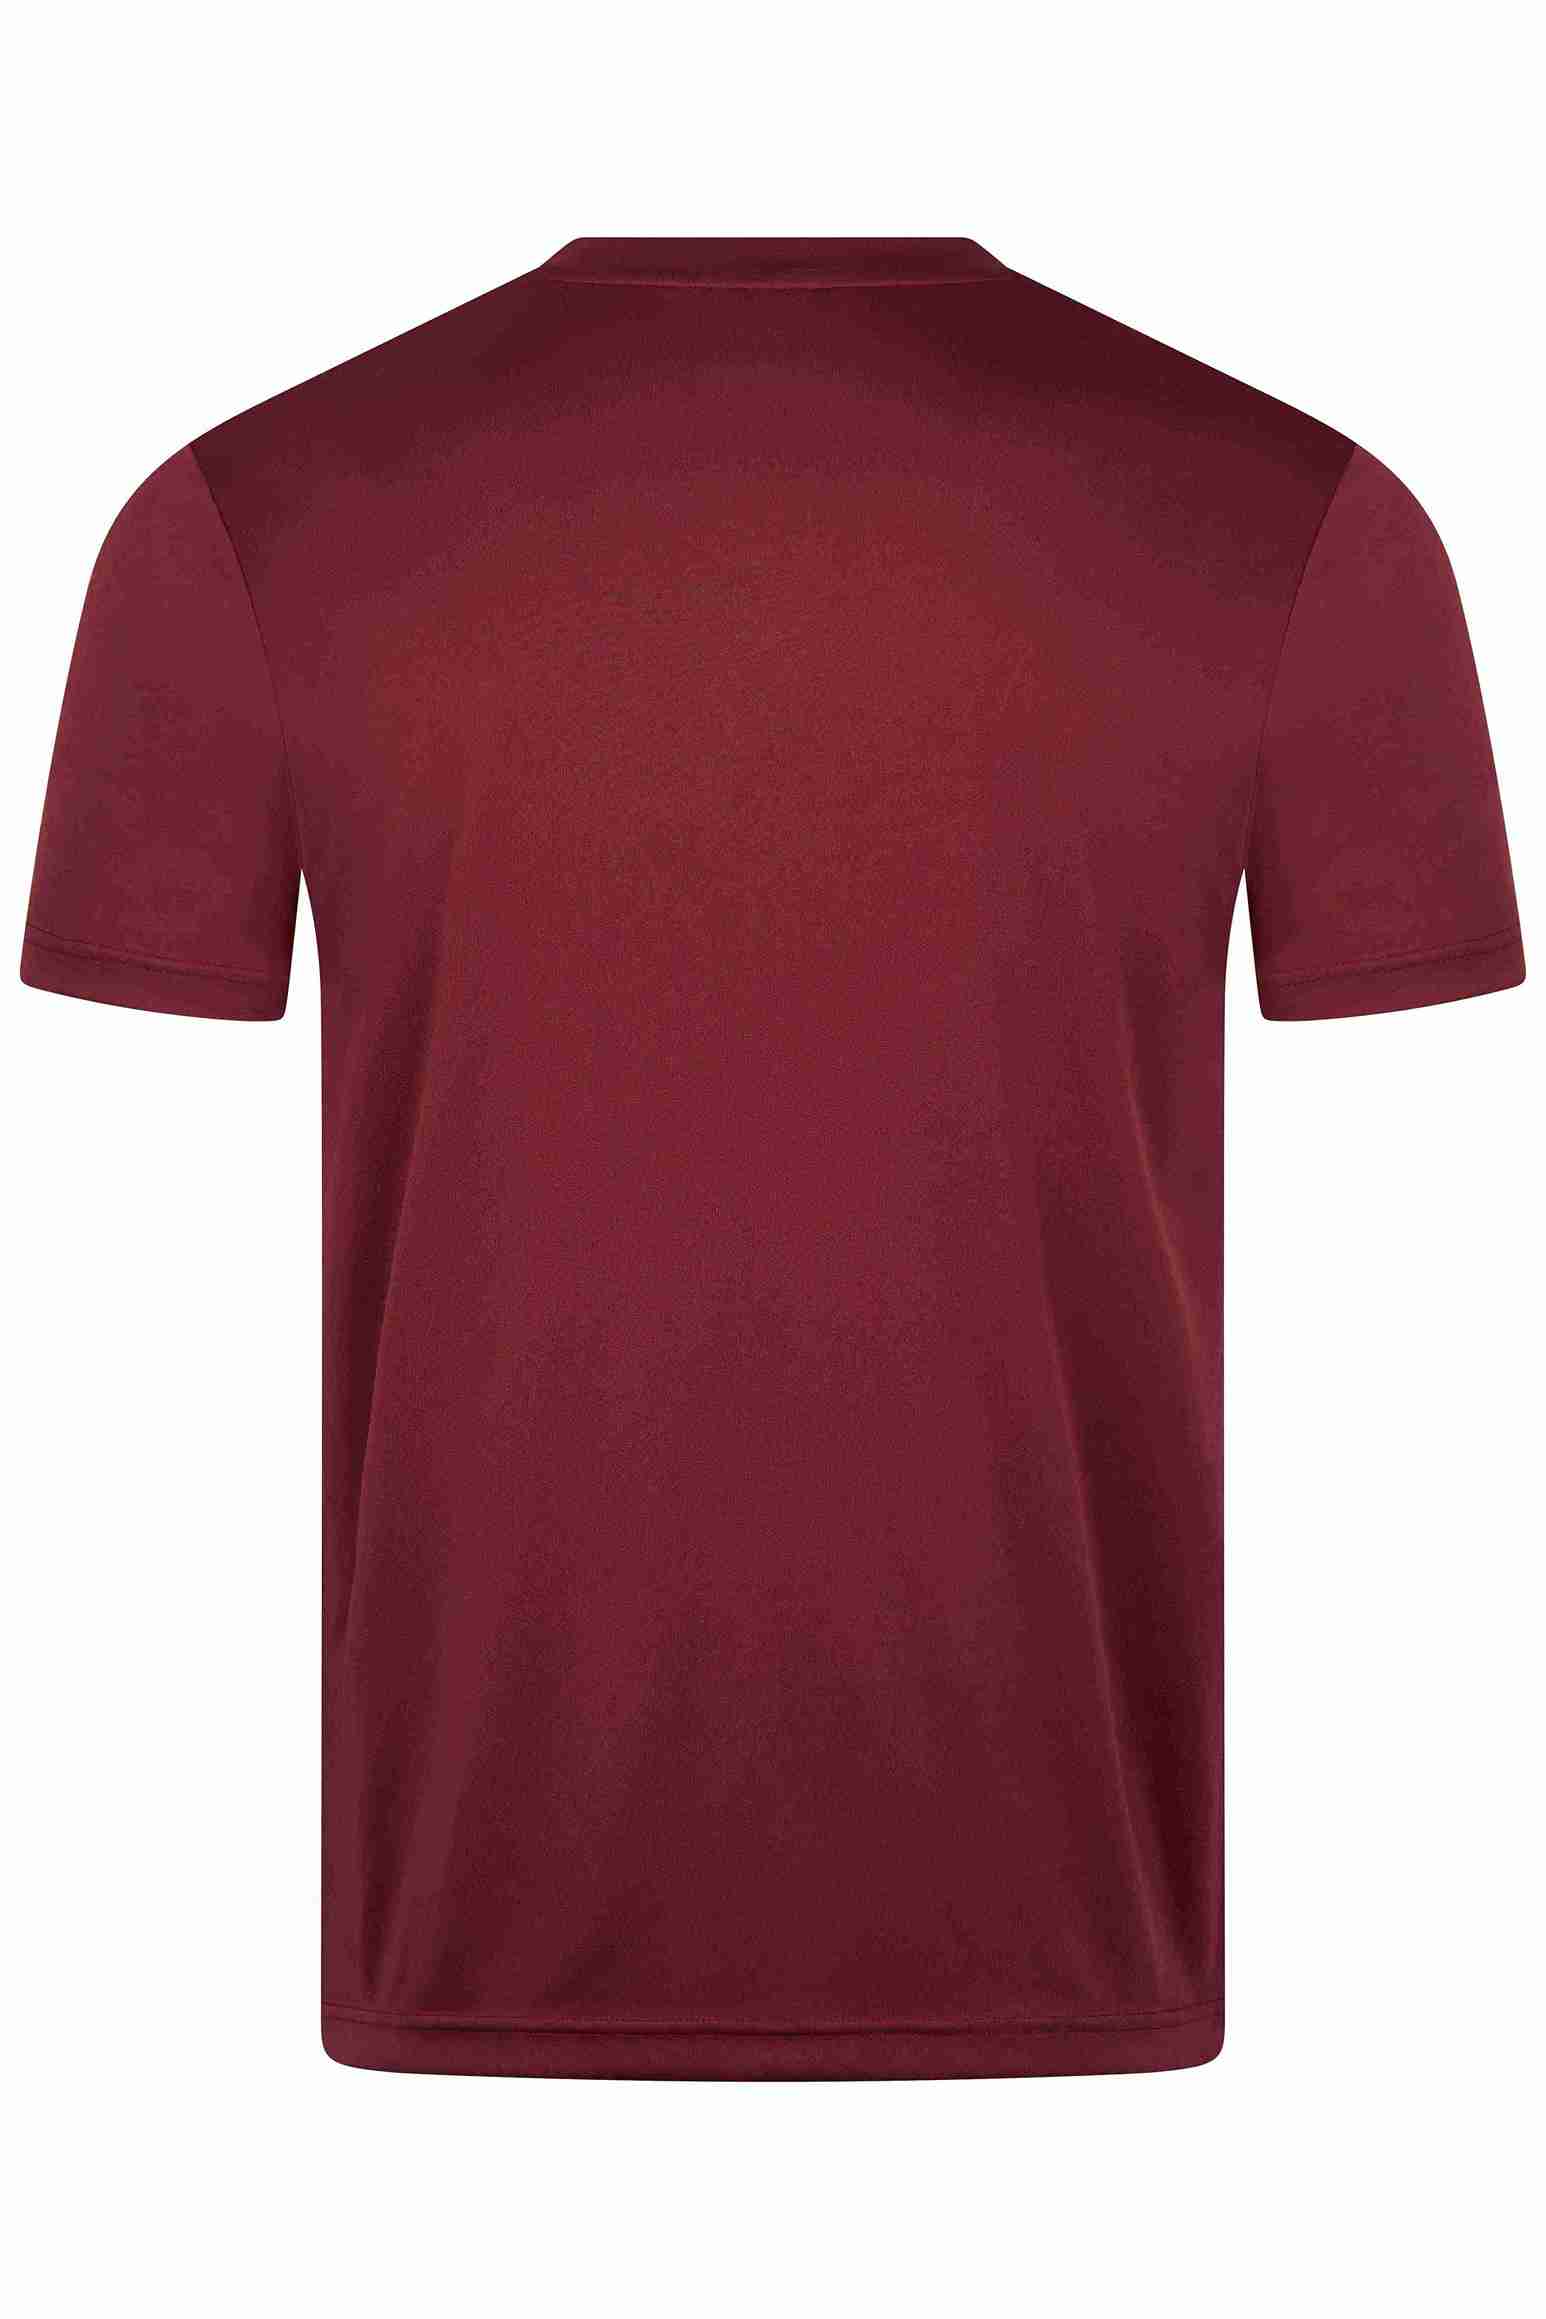 VICTOR T-Shirt T-43102D Unisex - Rot S